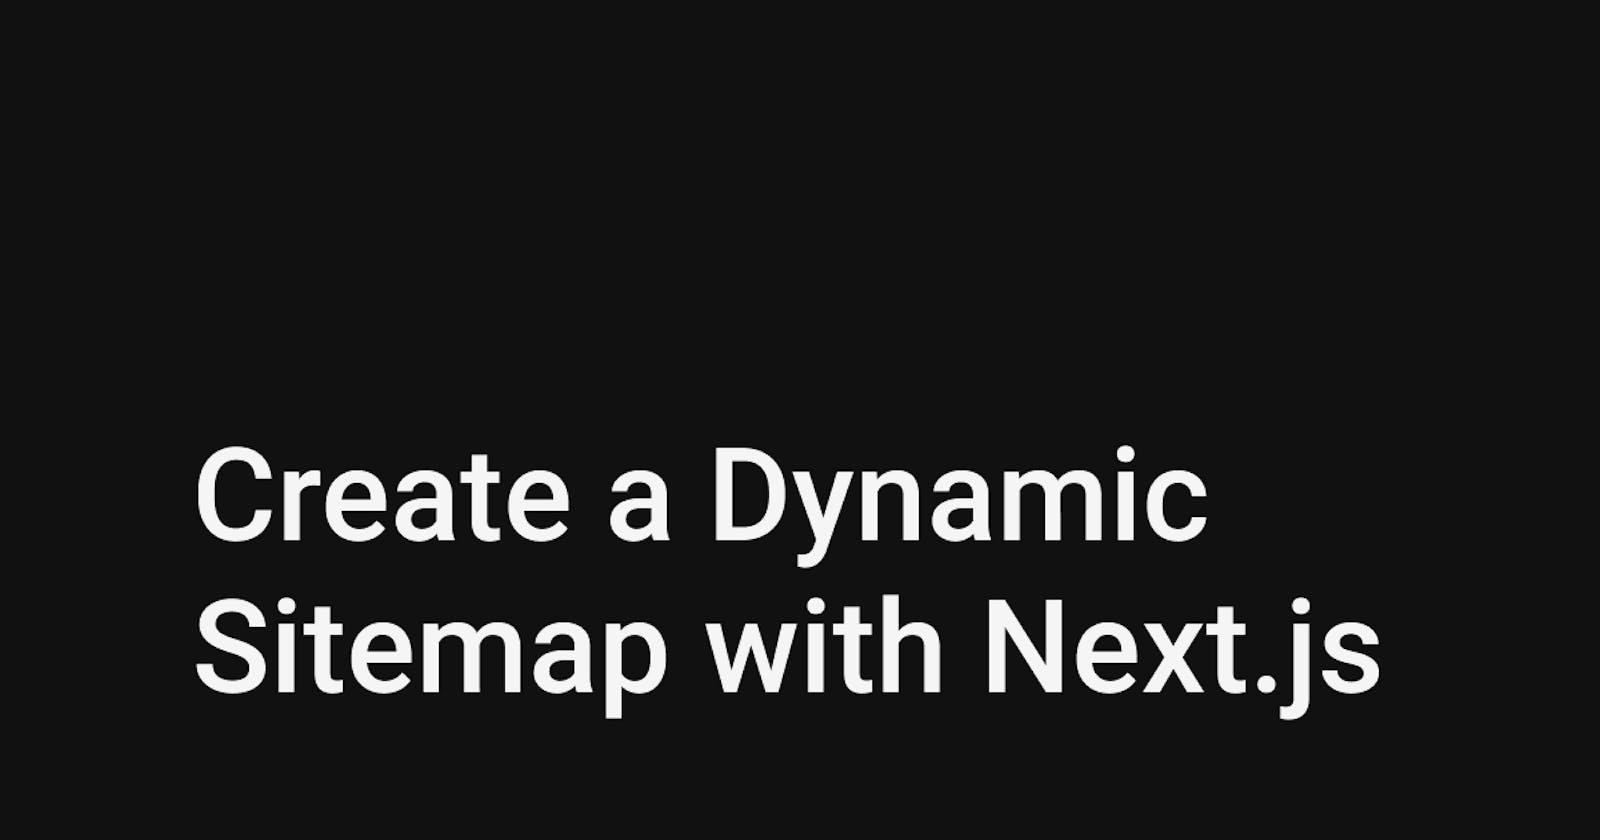 Create a Dynamic Sitemap with Next.js